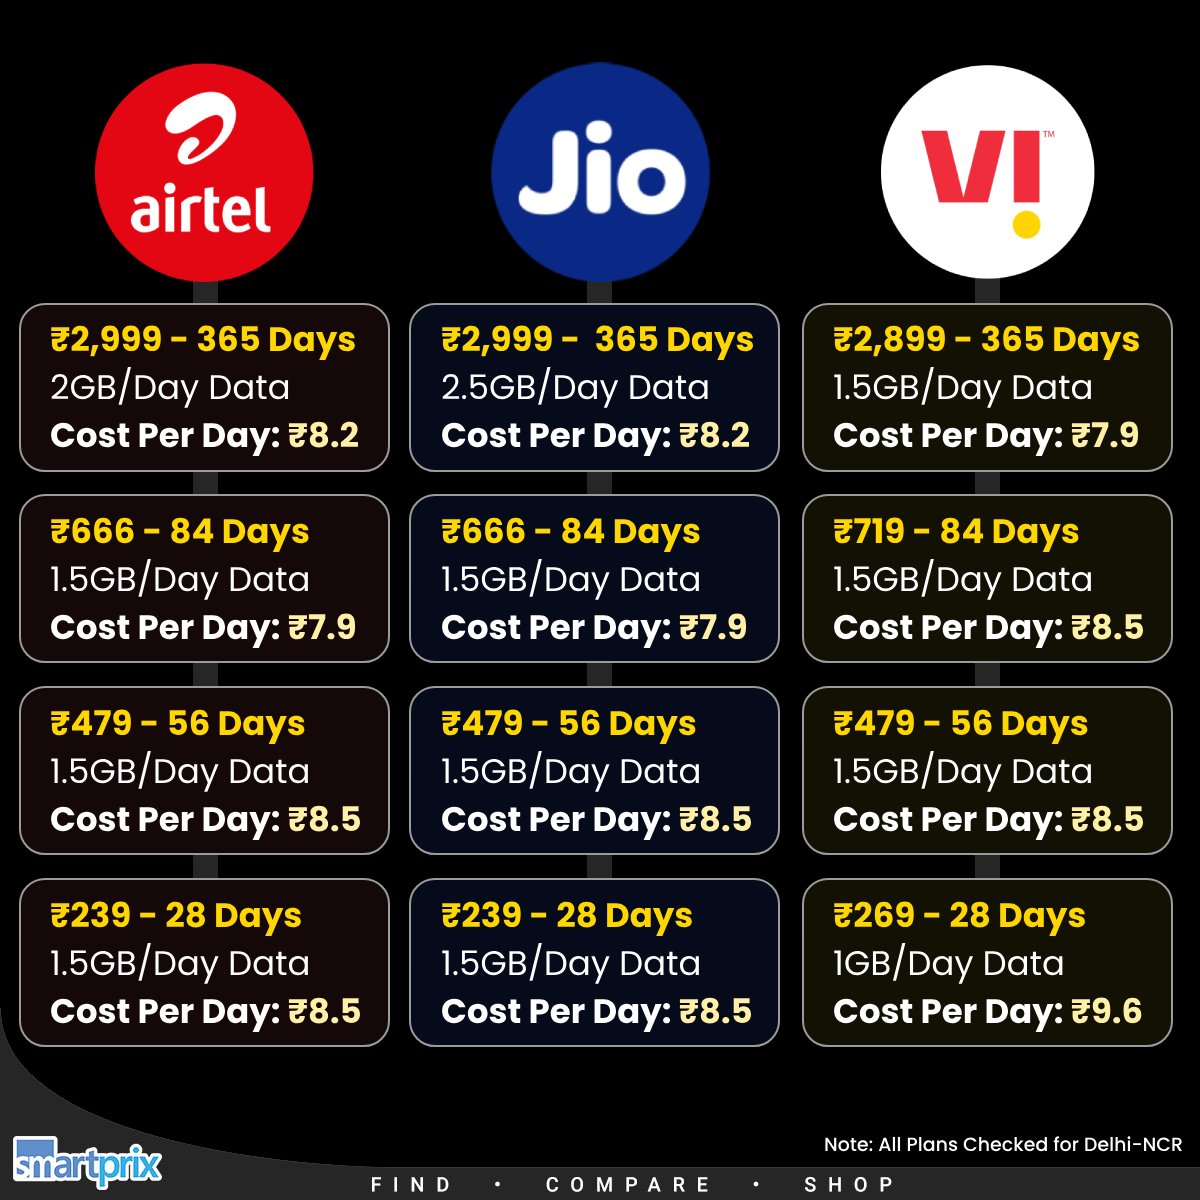 How much do Airtel, Jio, and Vi unlimited prepaid plans cost per day?

What's your current network and recharge plan?
#Airtel #Jio #VodafoneIdea #RechargePlans